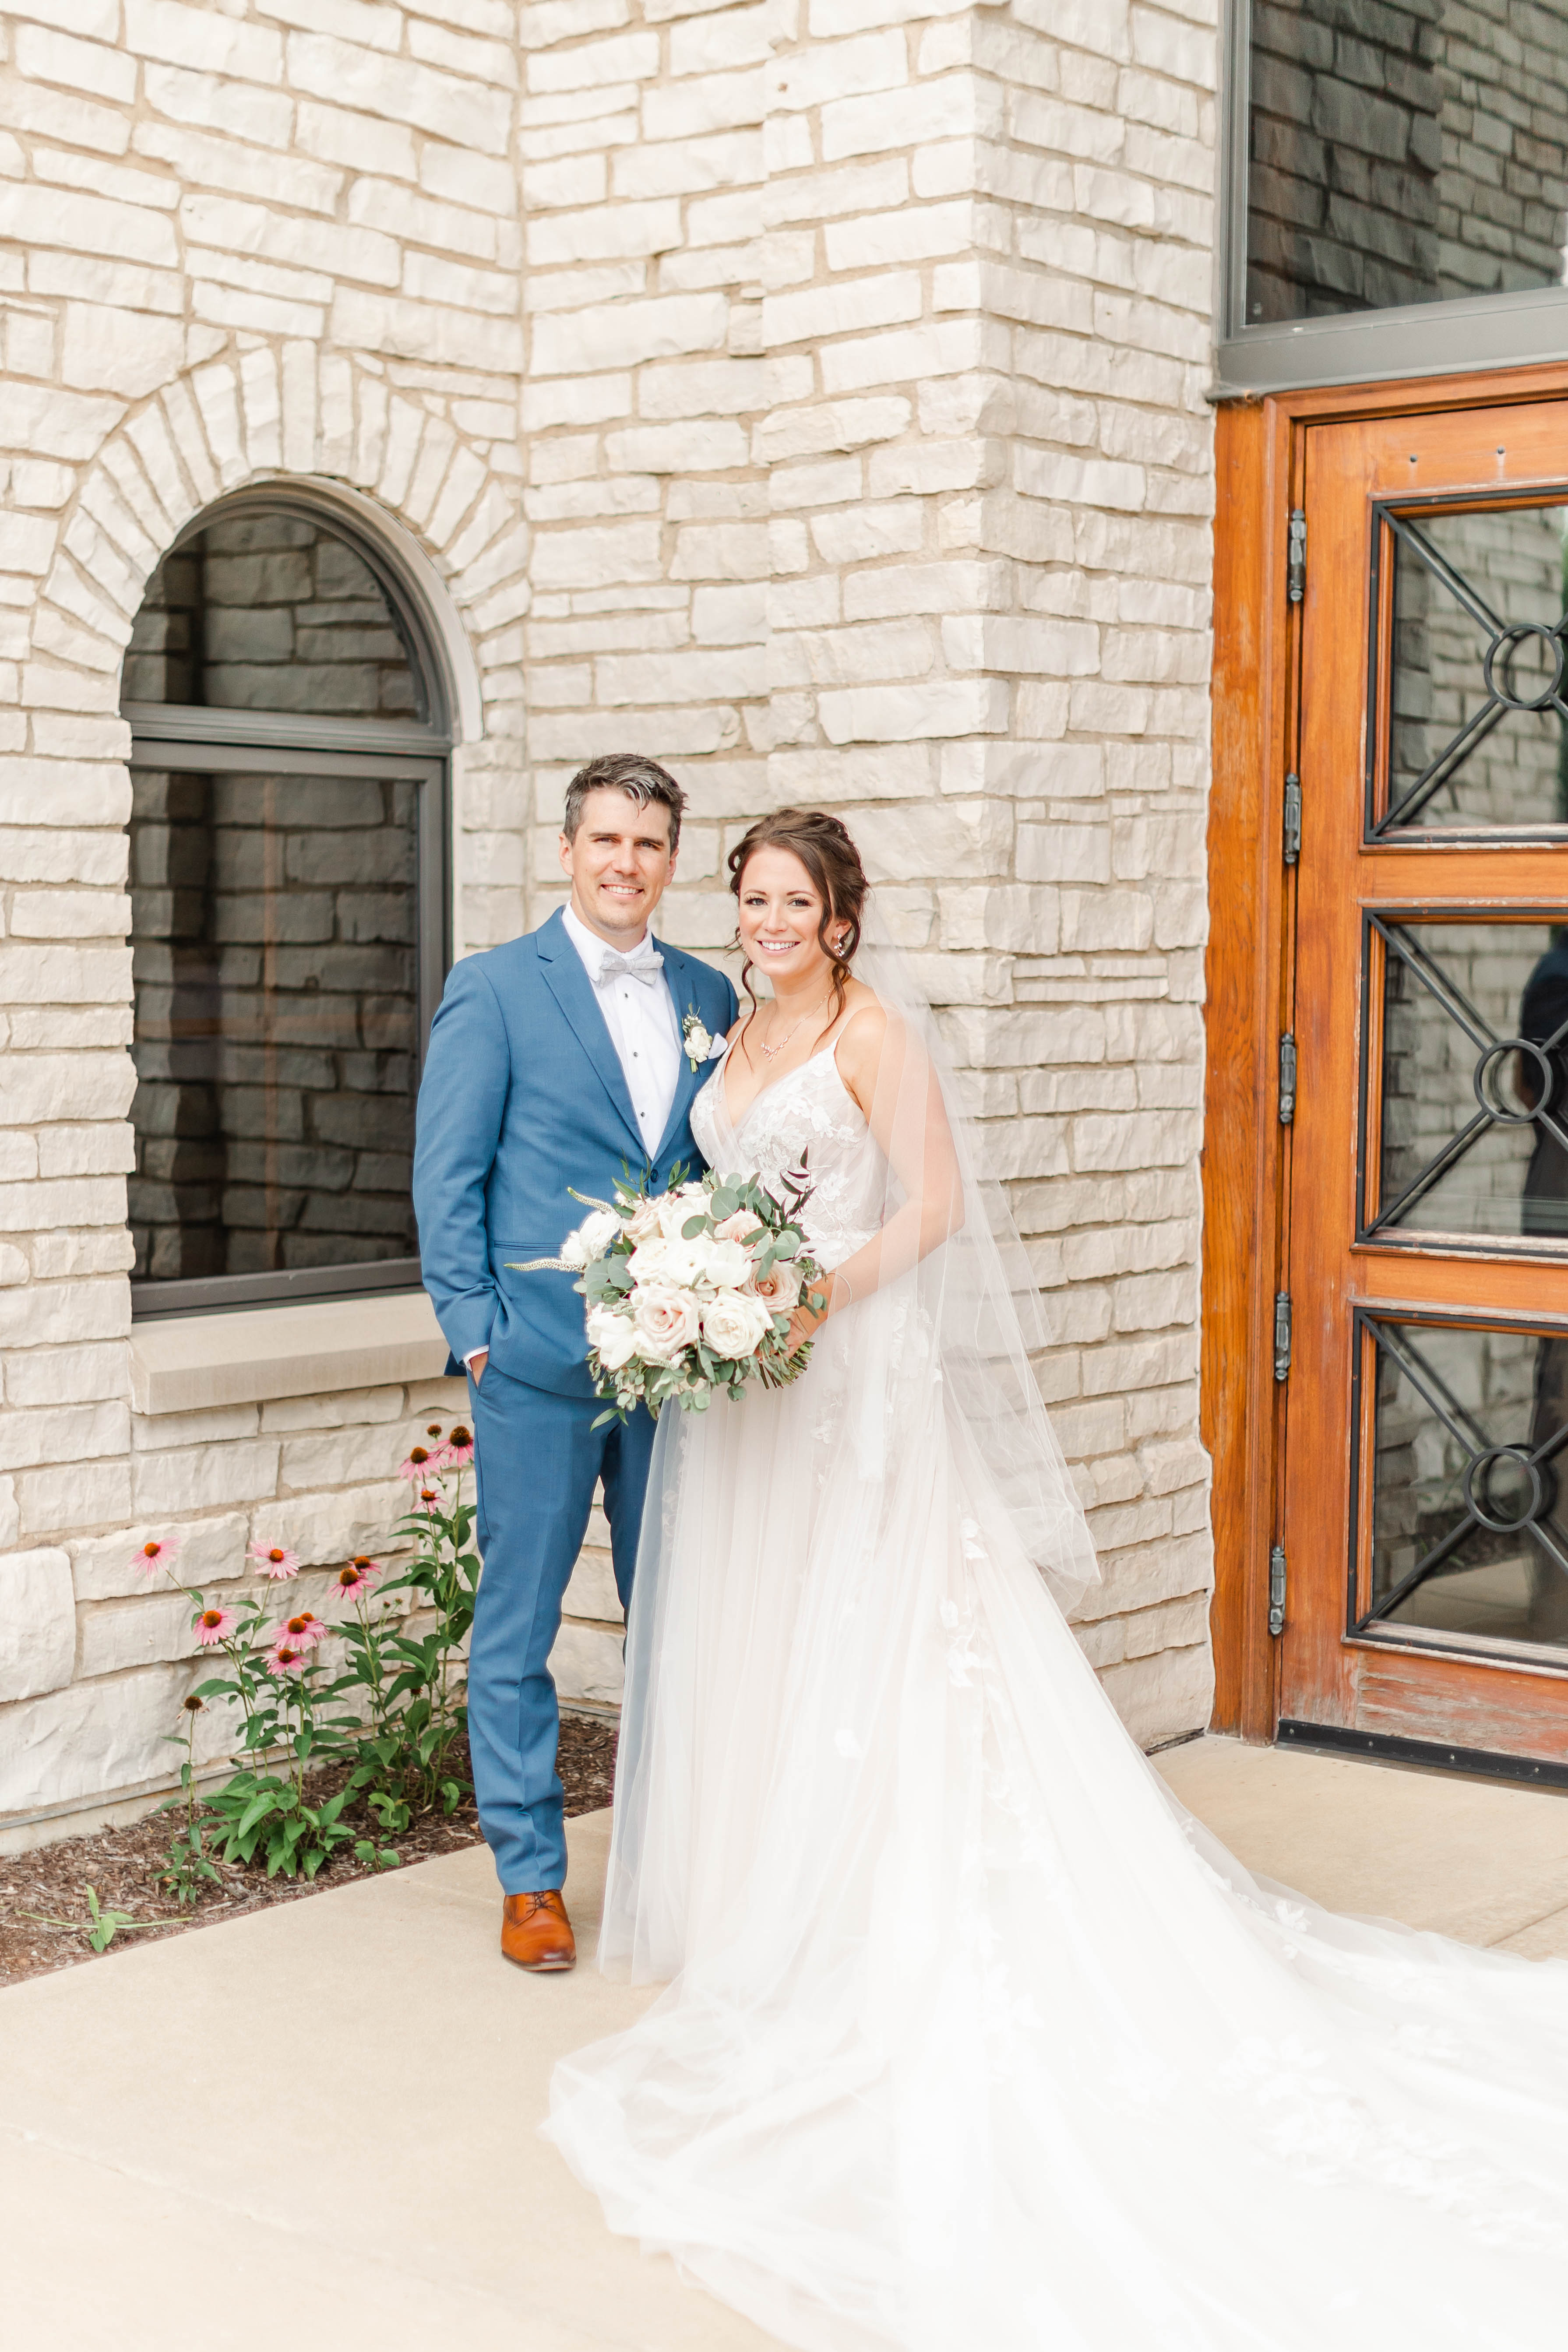 Groom in a medium blue suit and bride in a white wedding dress standing outside what appears to be a church.